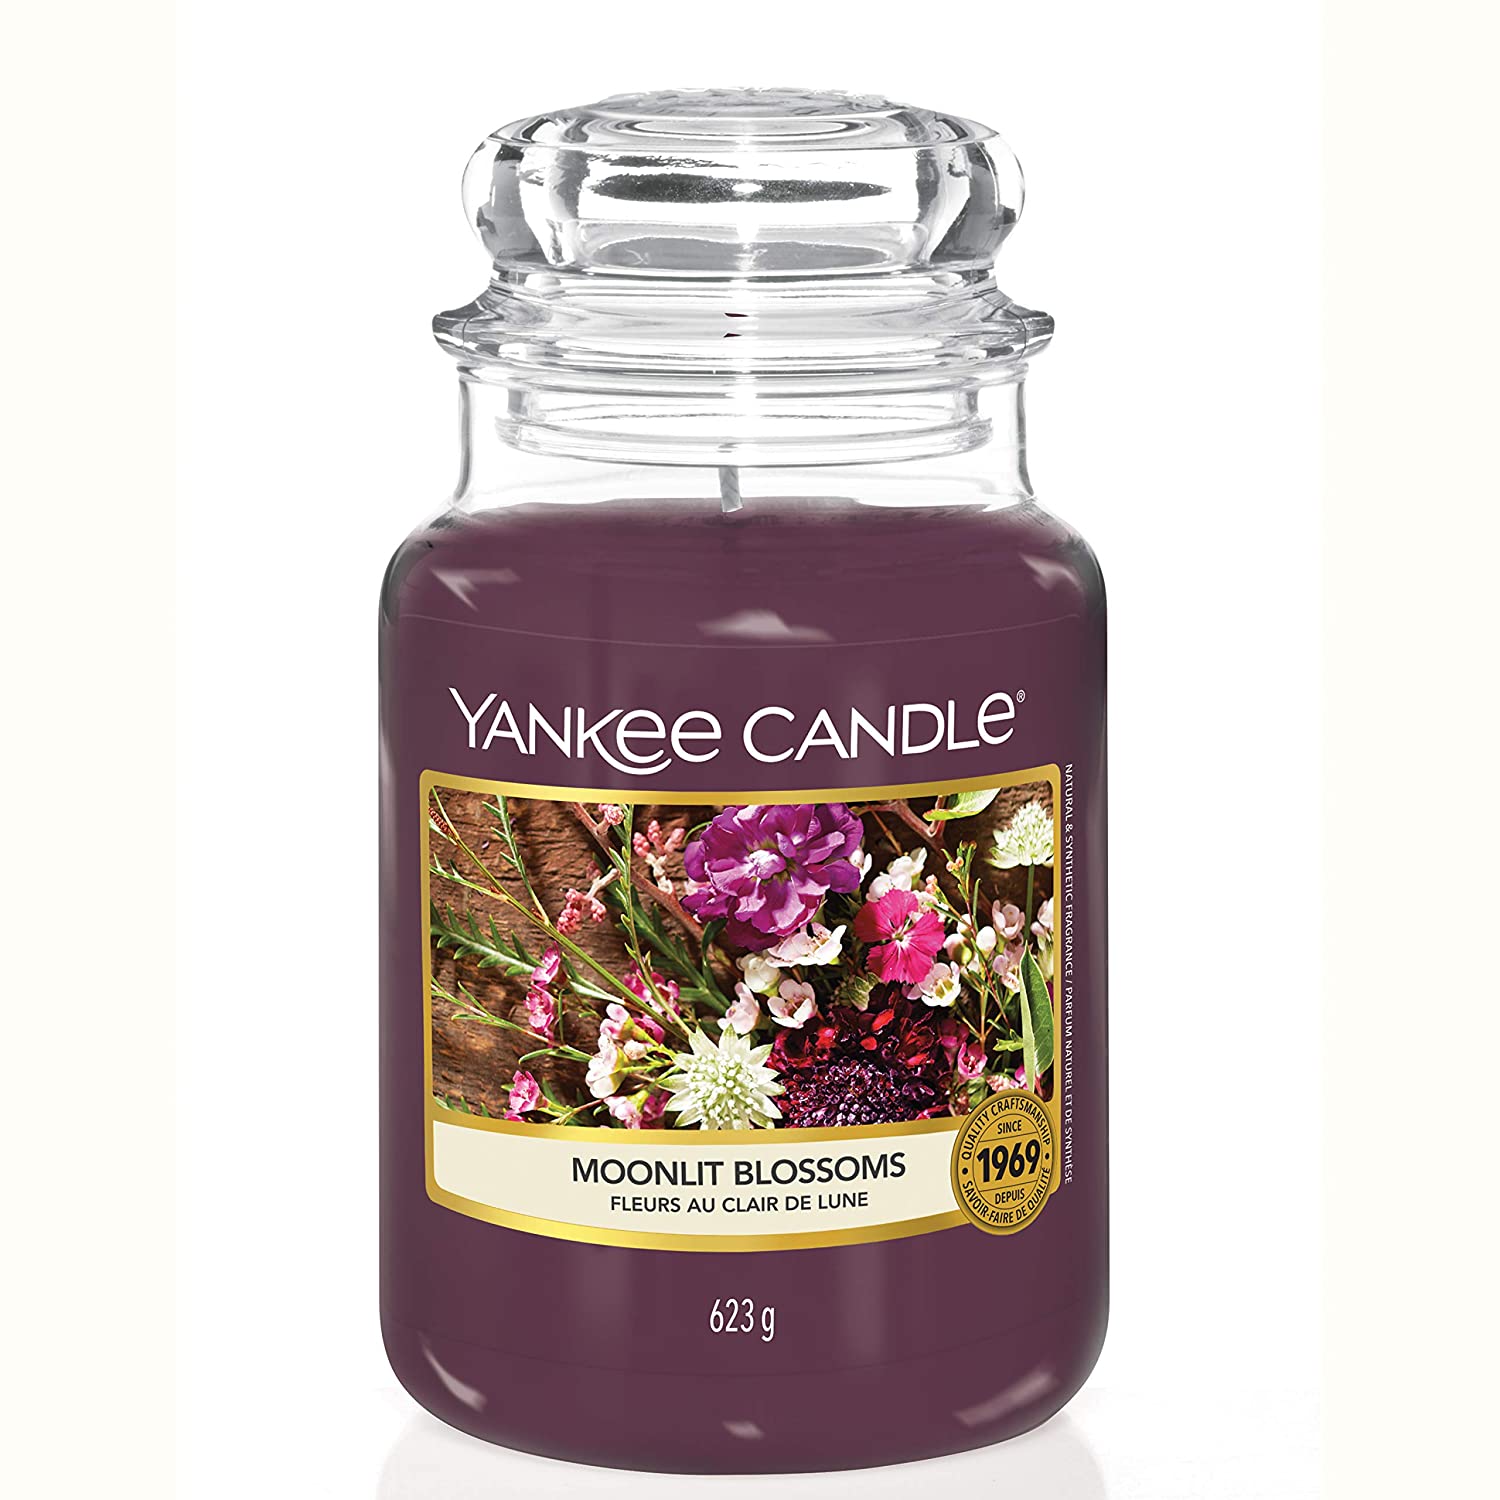 Yankee Candle Moonlit Blossoms Large Jar Candle